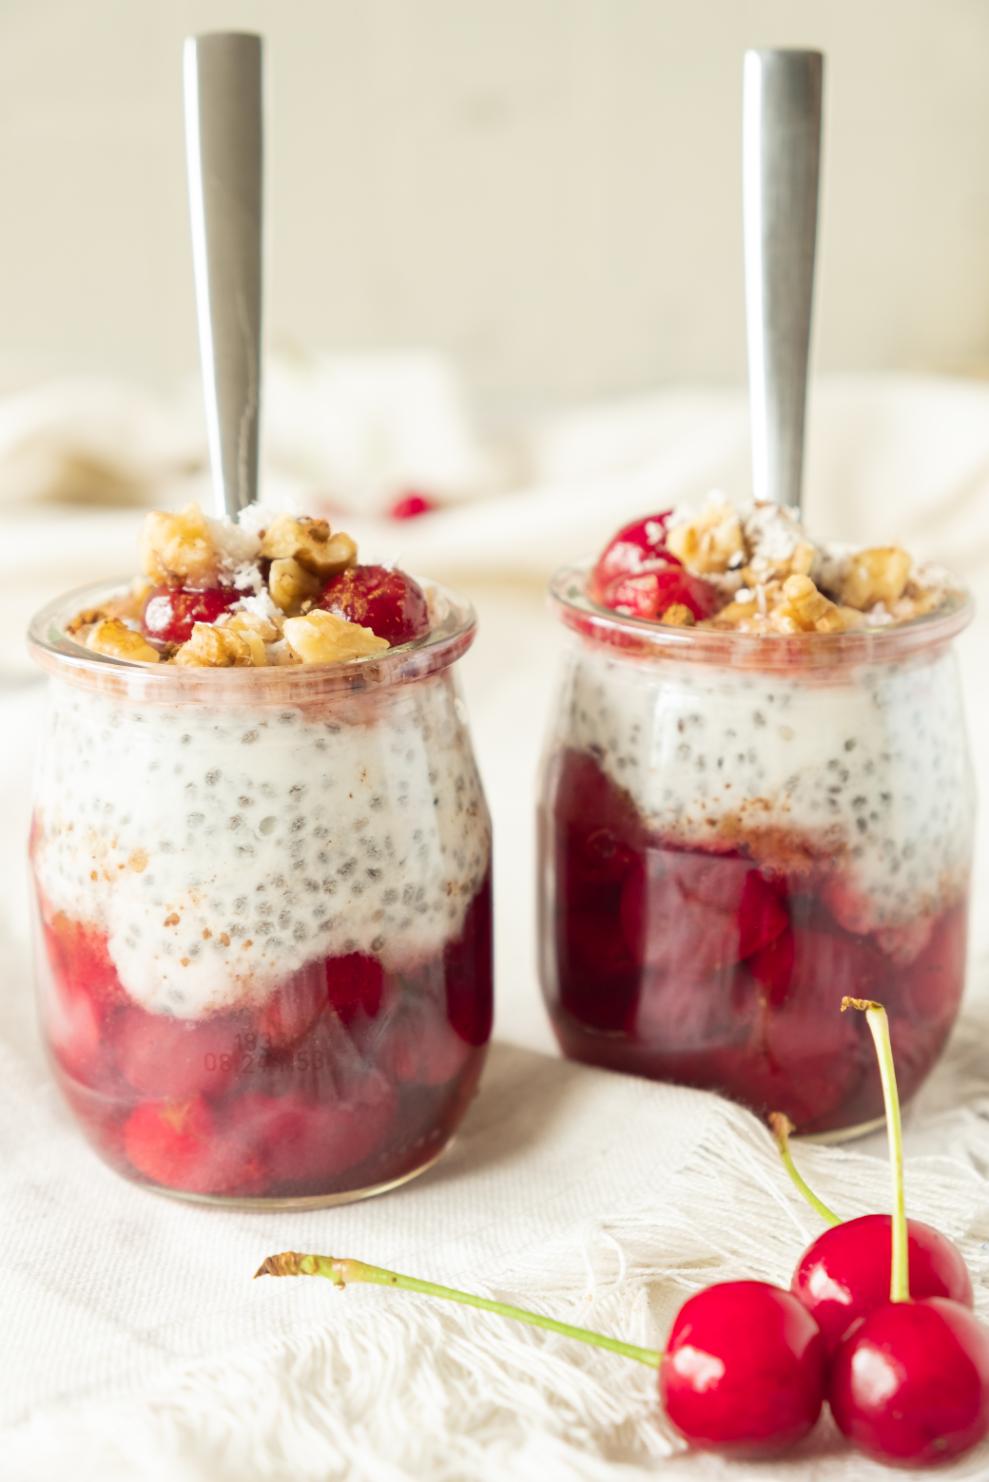 Two jars of layered cherry chia pudding, red fruit compote, and topped with crunchy walnuts, served with fresh cherries on the side.